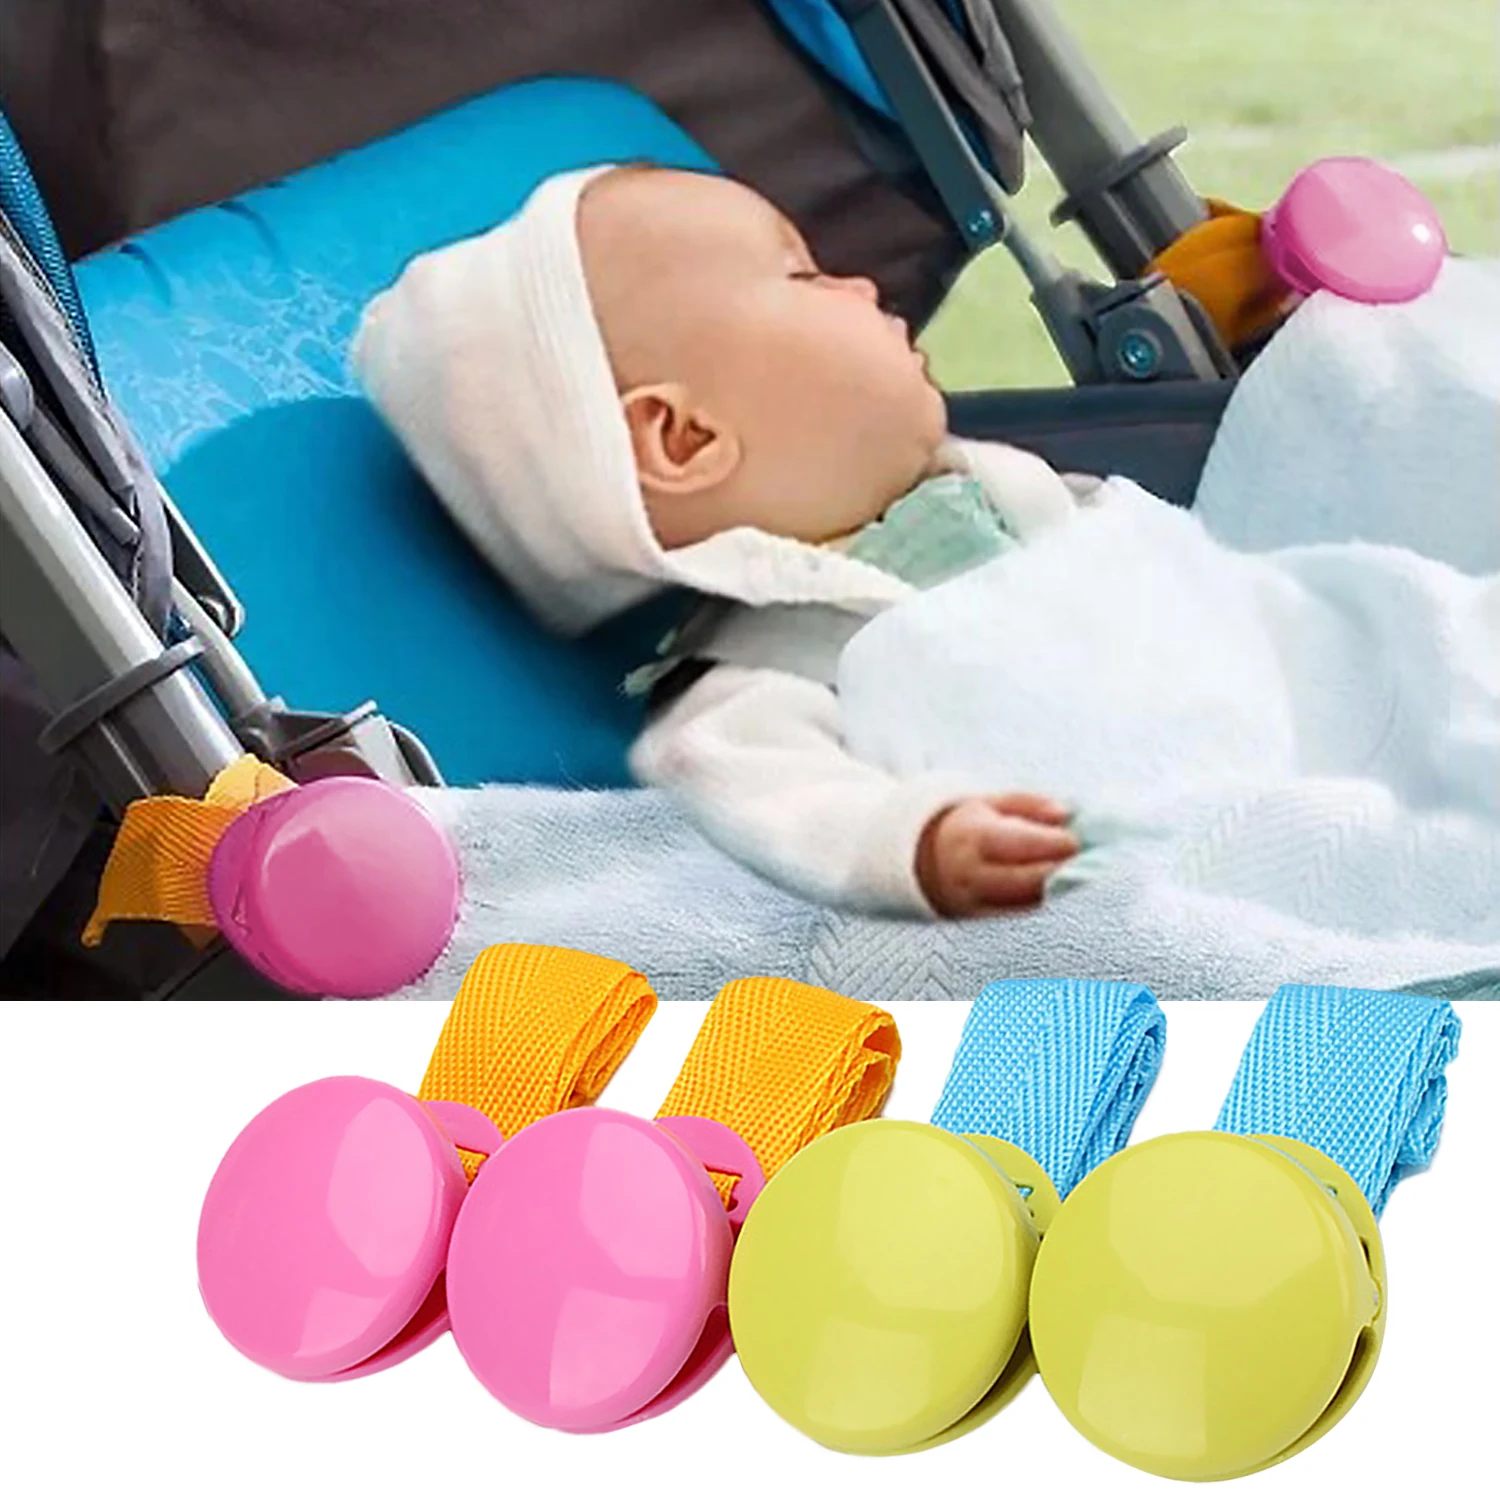 1Pair Baby Stroller Anti Tipi Clip Anti-slip Blanket Clip Fasteners Grippers Suspenders Sheet Holder Stroller Car Seat Accessory baby stroller accessories products